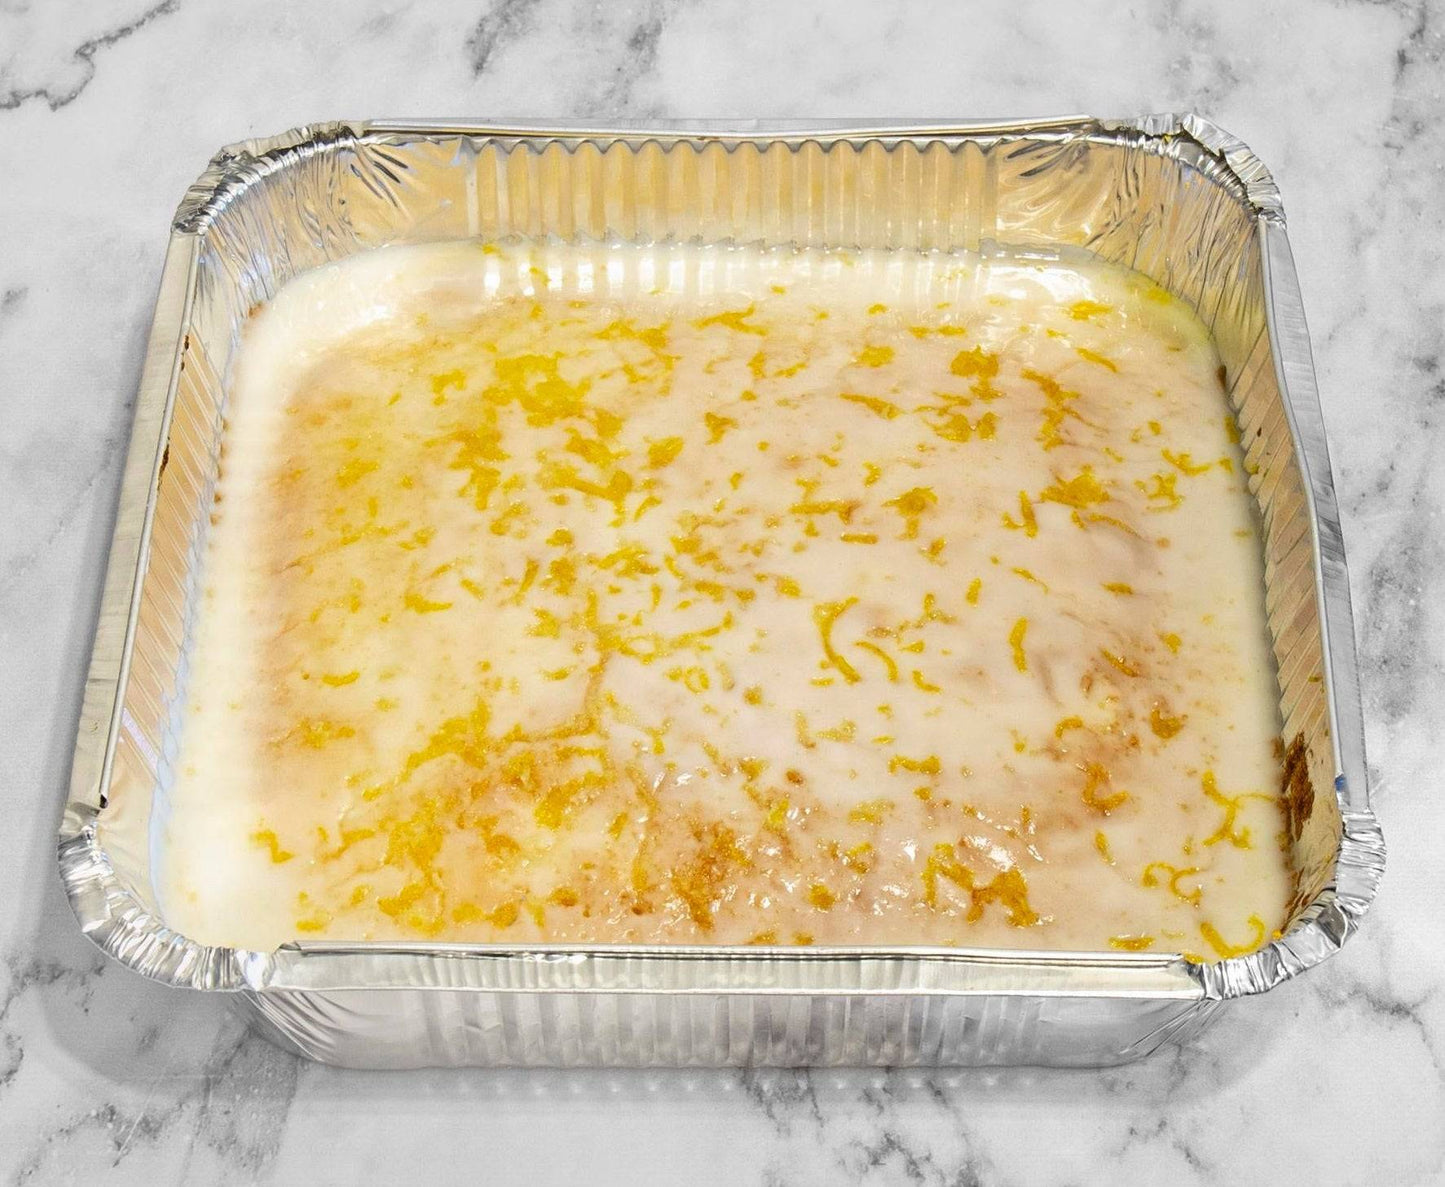 Refreshing lemon cake tray with a tangy citrus flavor